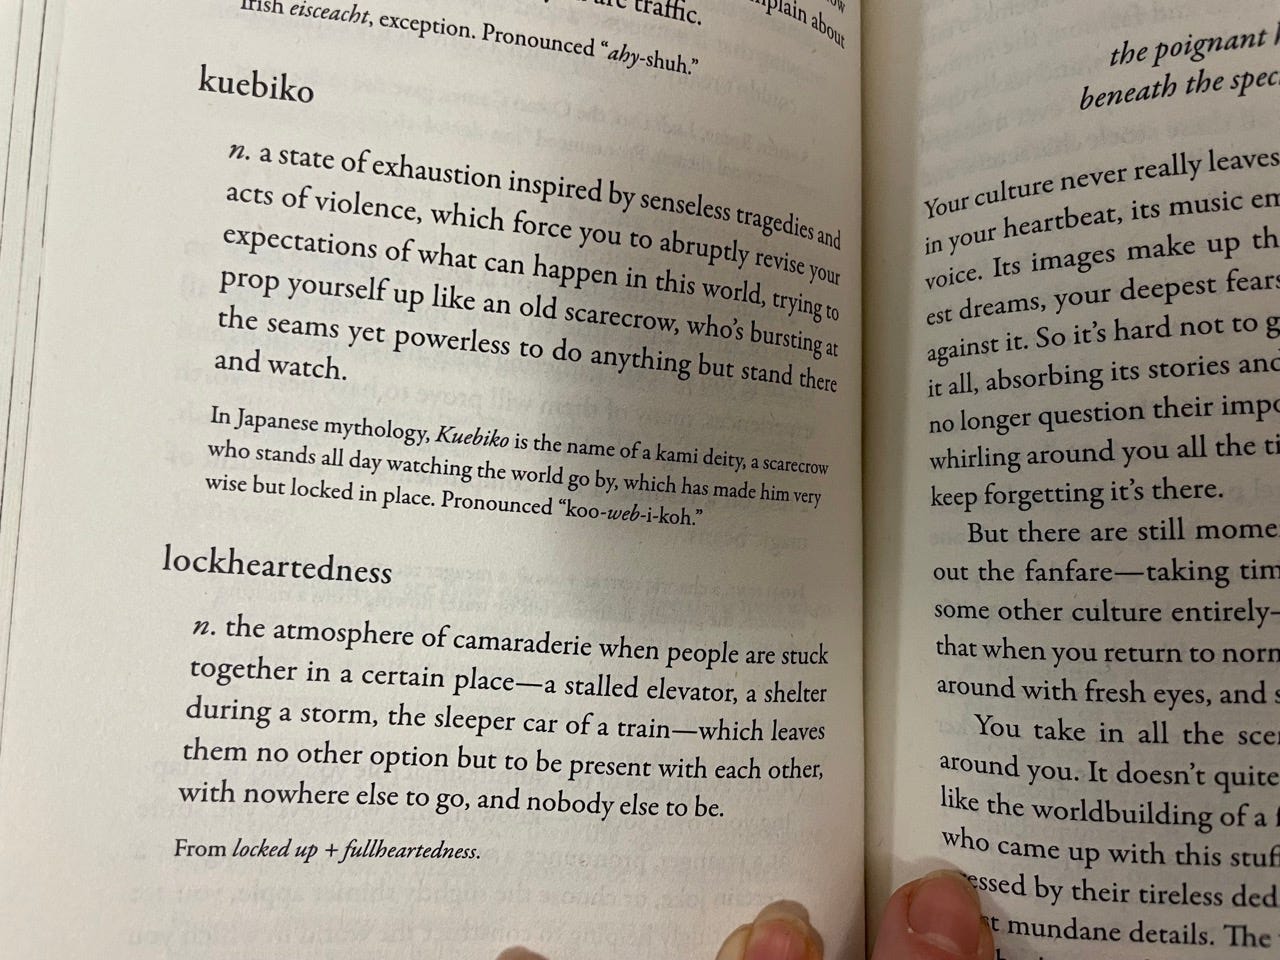 A couple of entries in John Koenig's book, The Dictionary of Obscure Sorrows, showing his neologism, 'kuebiko', a state of exhaustion inspired by senseless acts of violence and tragedies.